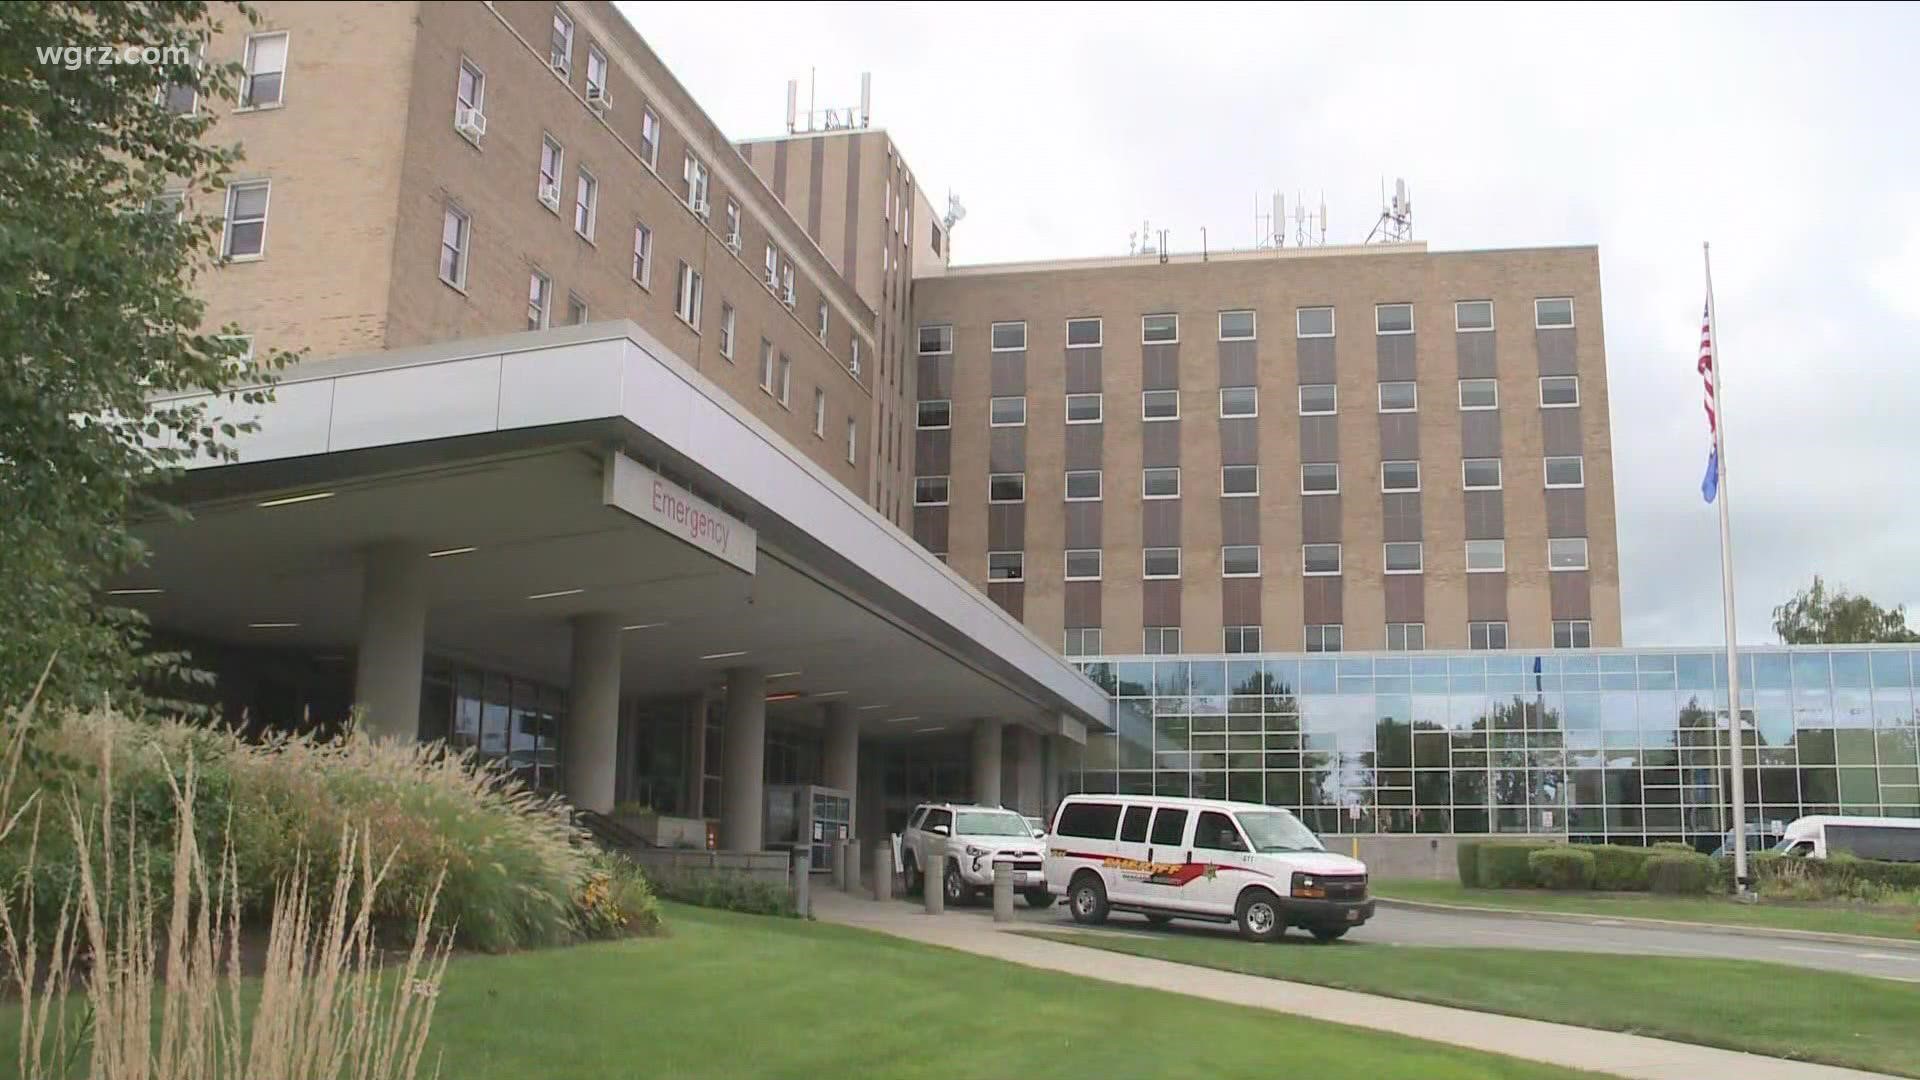 The union representing 1900 healthcare workers at South Buffalo Mercy Hospital says significant differences still exist.